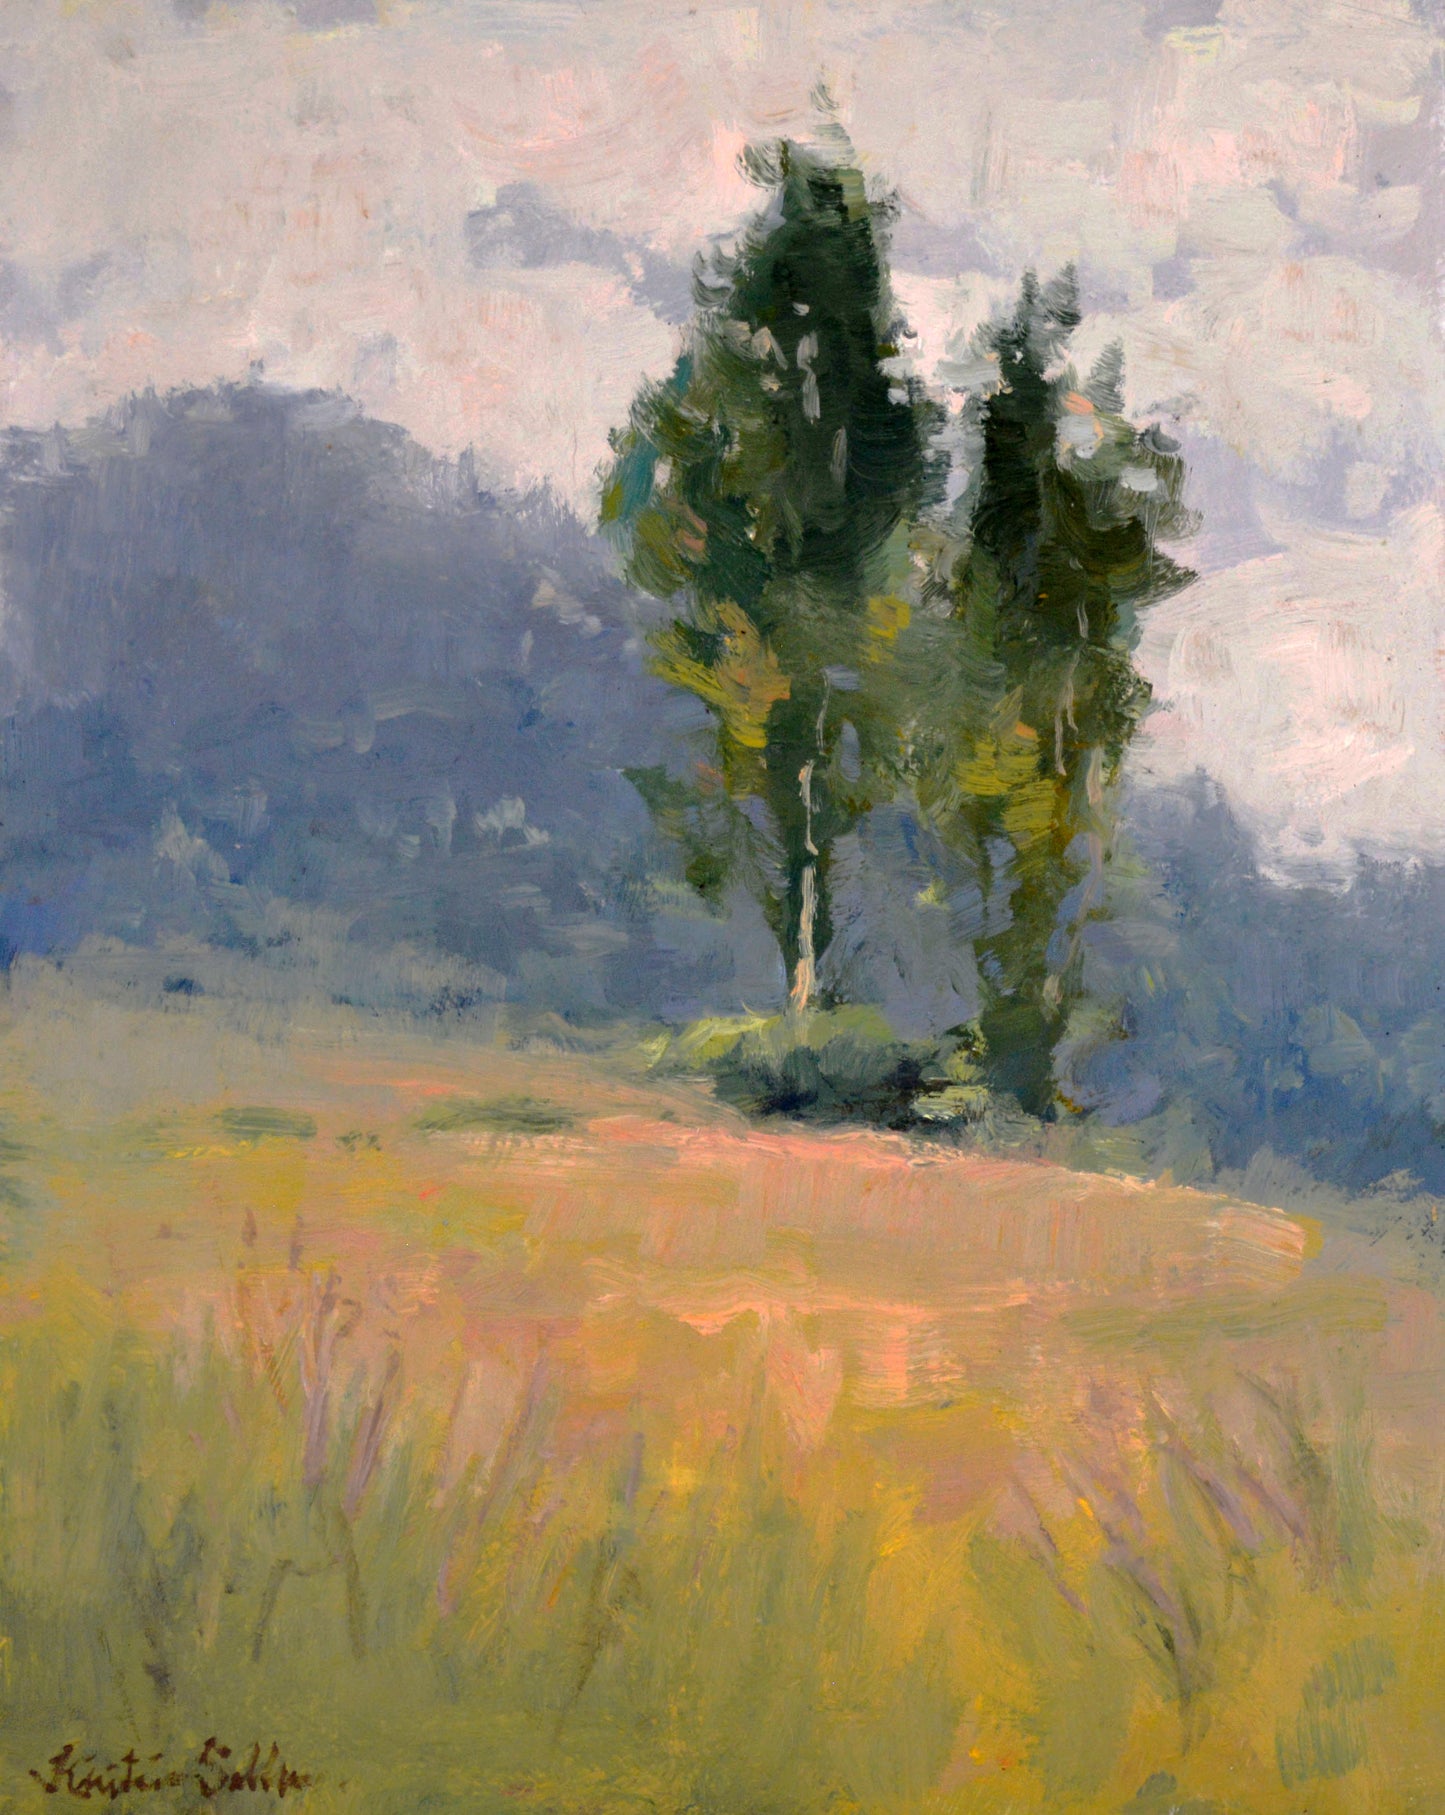 "Misty Crest" 14x11 Original Oil Painting by Artist Kristina Sellers